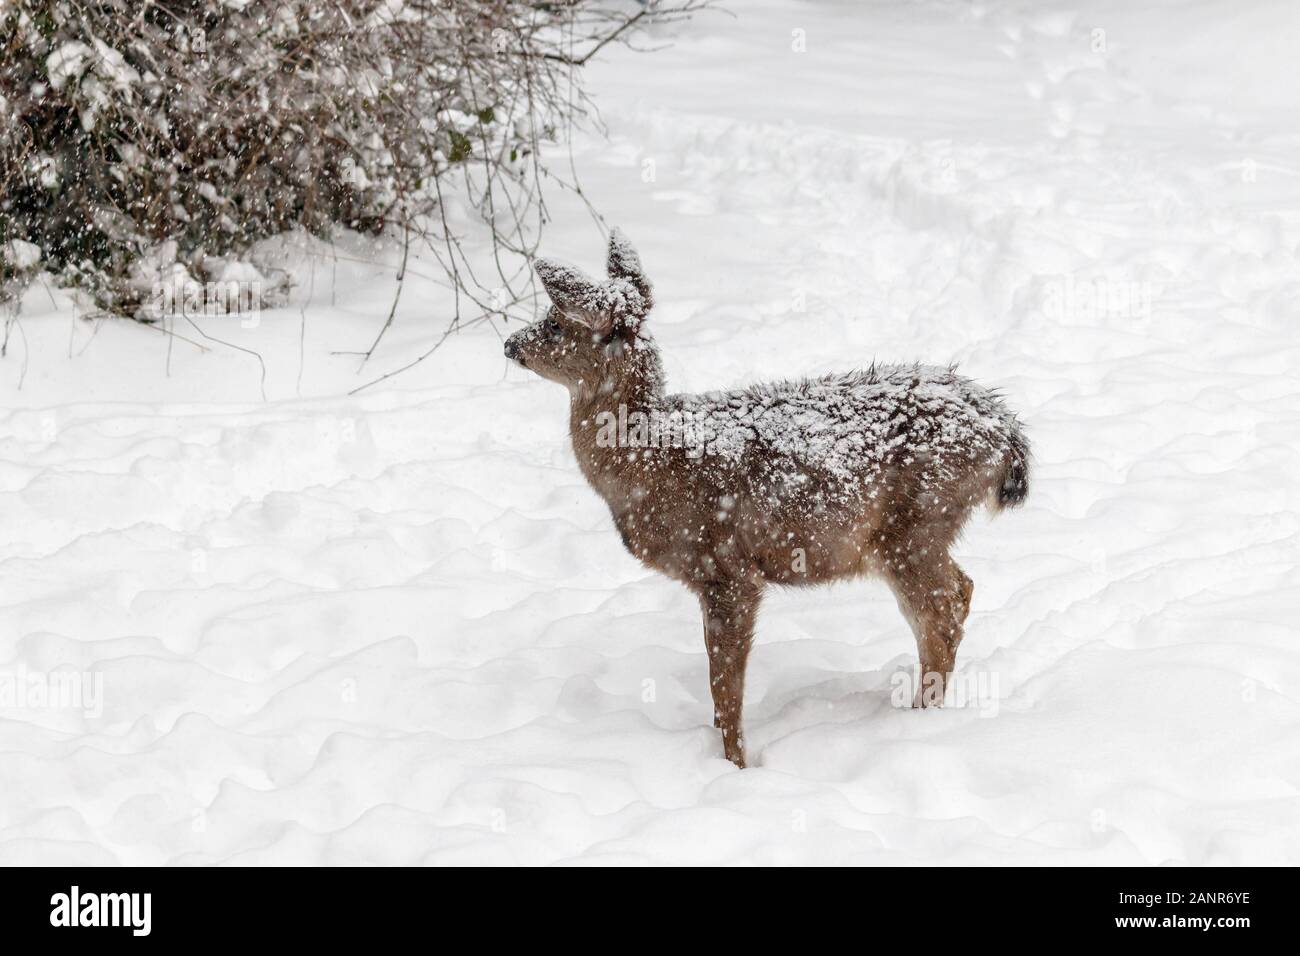 A lone Blacktail young deer experiencing its first winter stands in snow on a bitter cold day, watchful and alert, its fur coat covered in snowflakes. Stock Photo